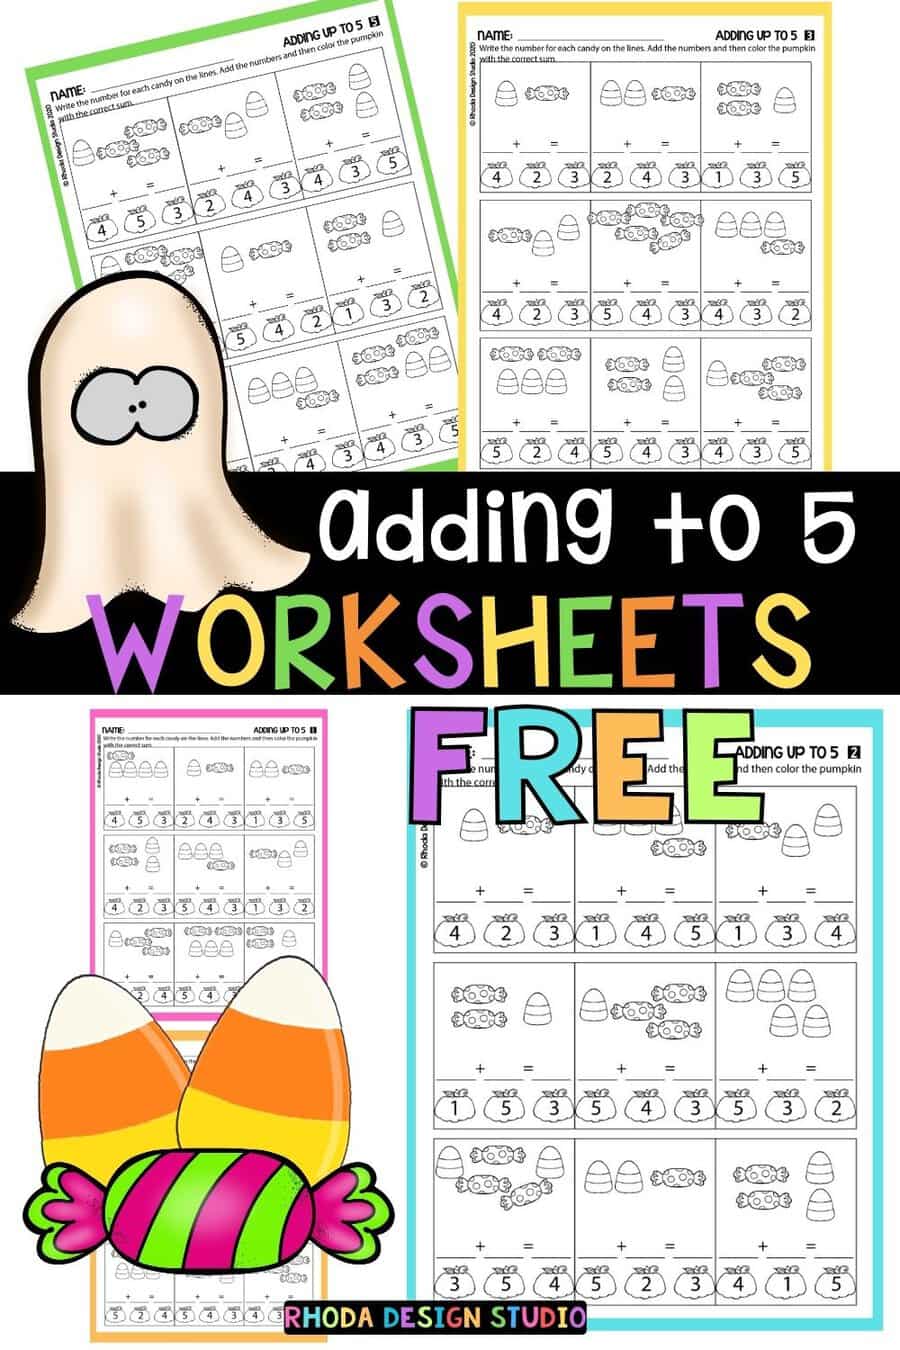 Adding up to 5 with Halloween Candy. Fun fall worksheets. free pdf, click here.